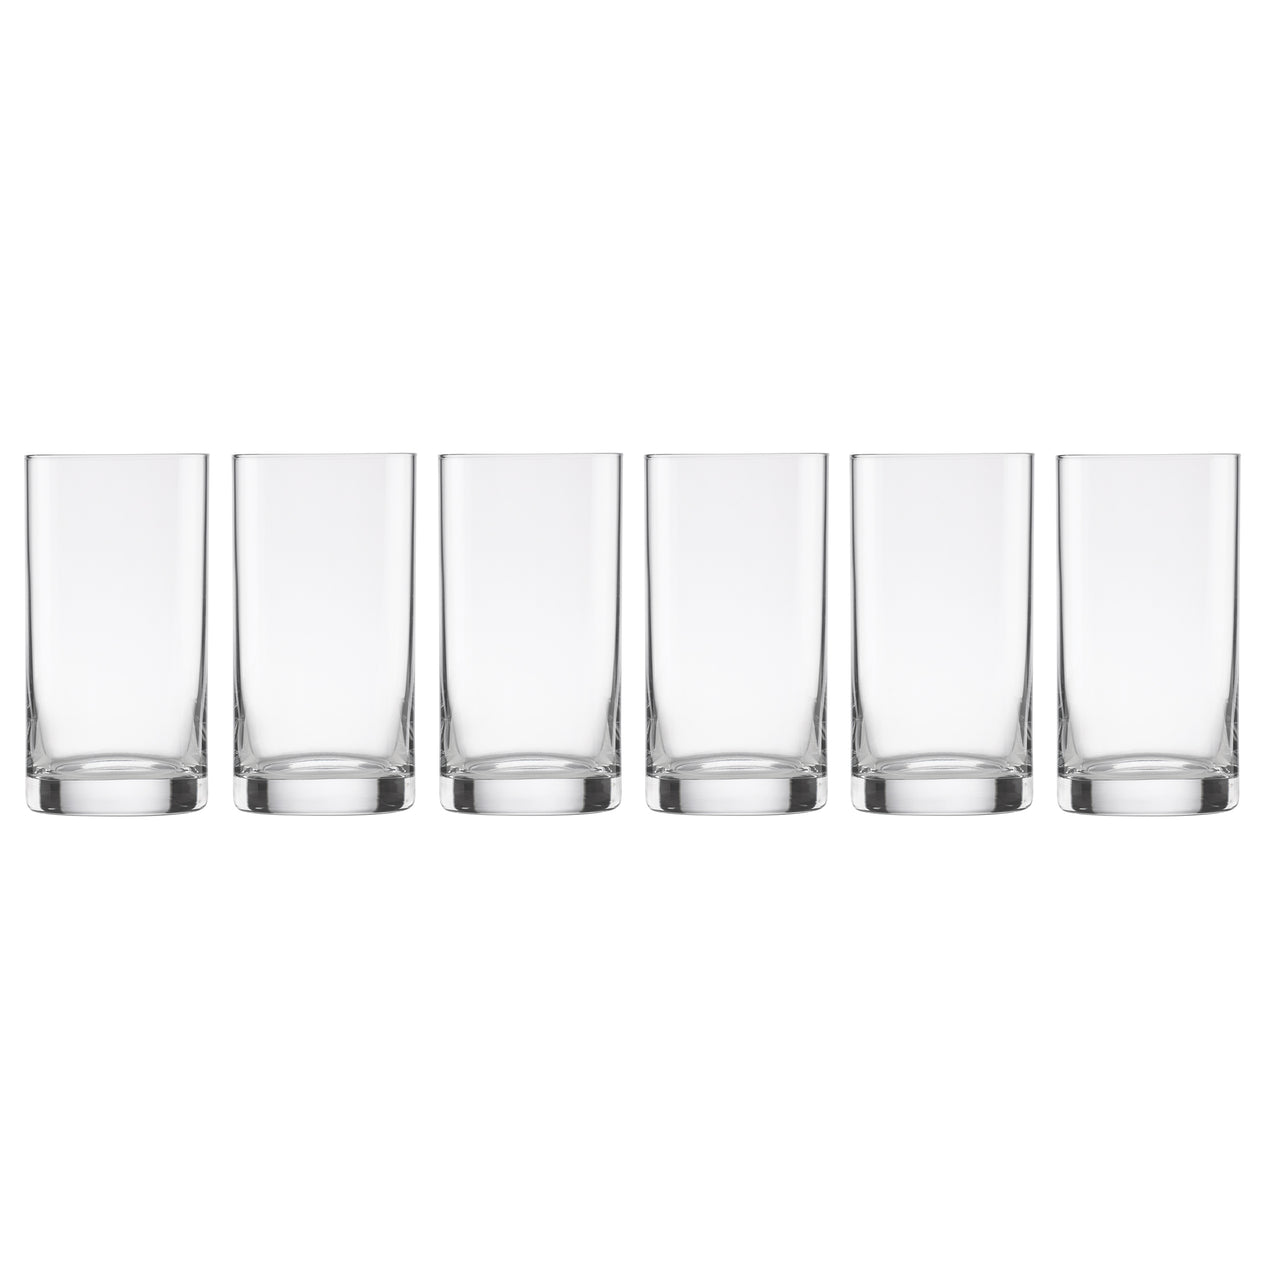 Juice Glass Sets: Enrich Your Drinking Experience Using These